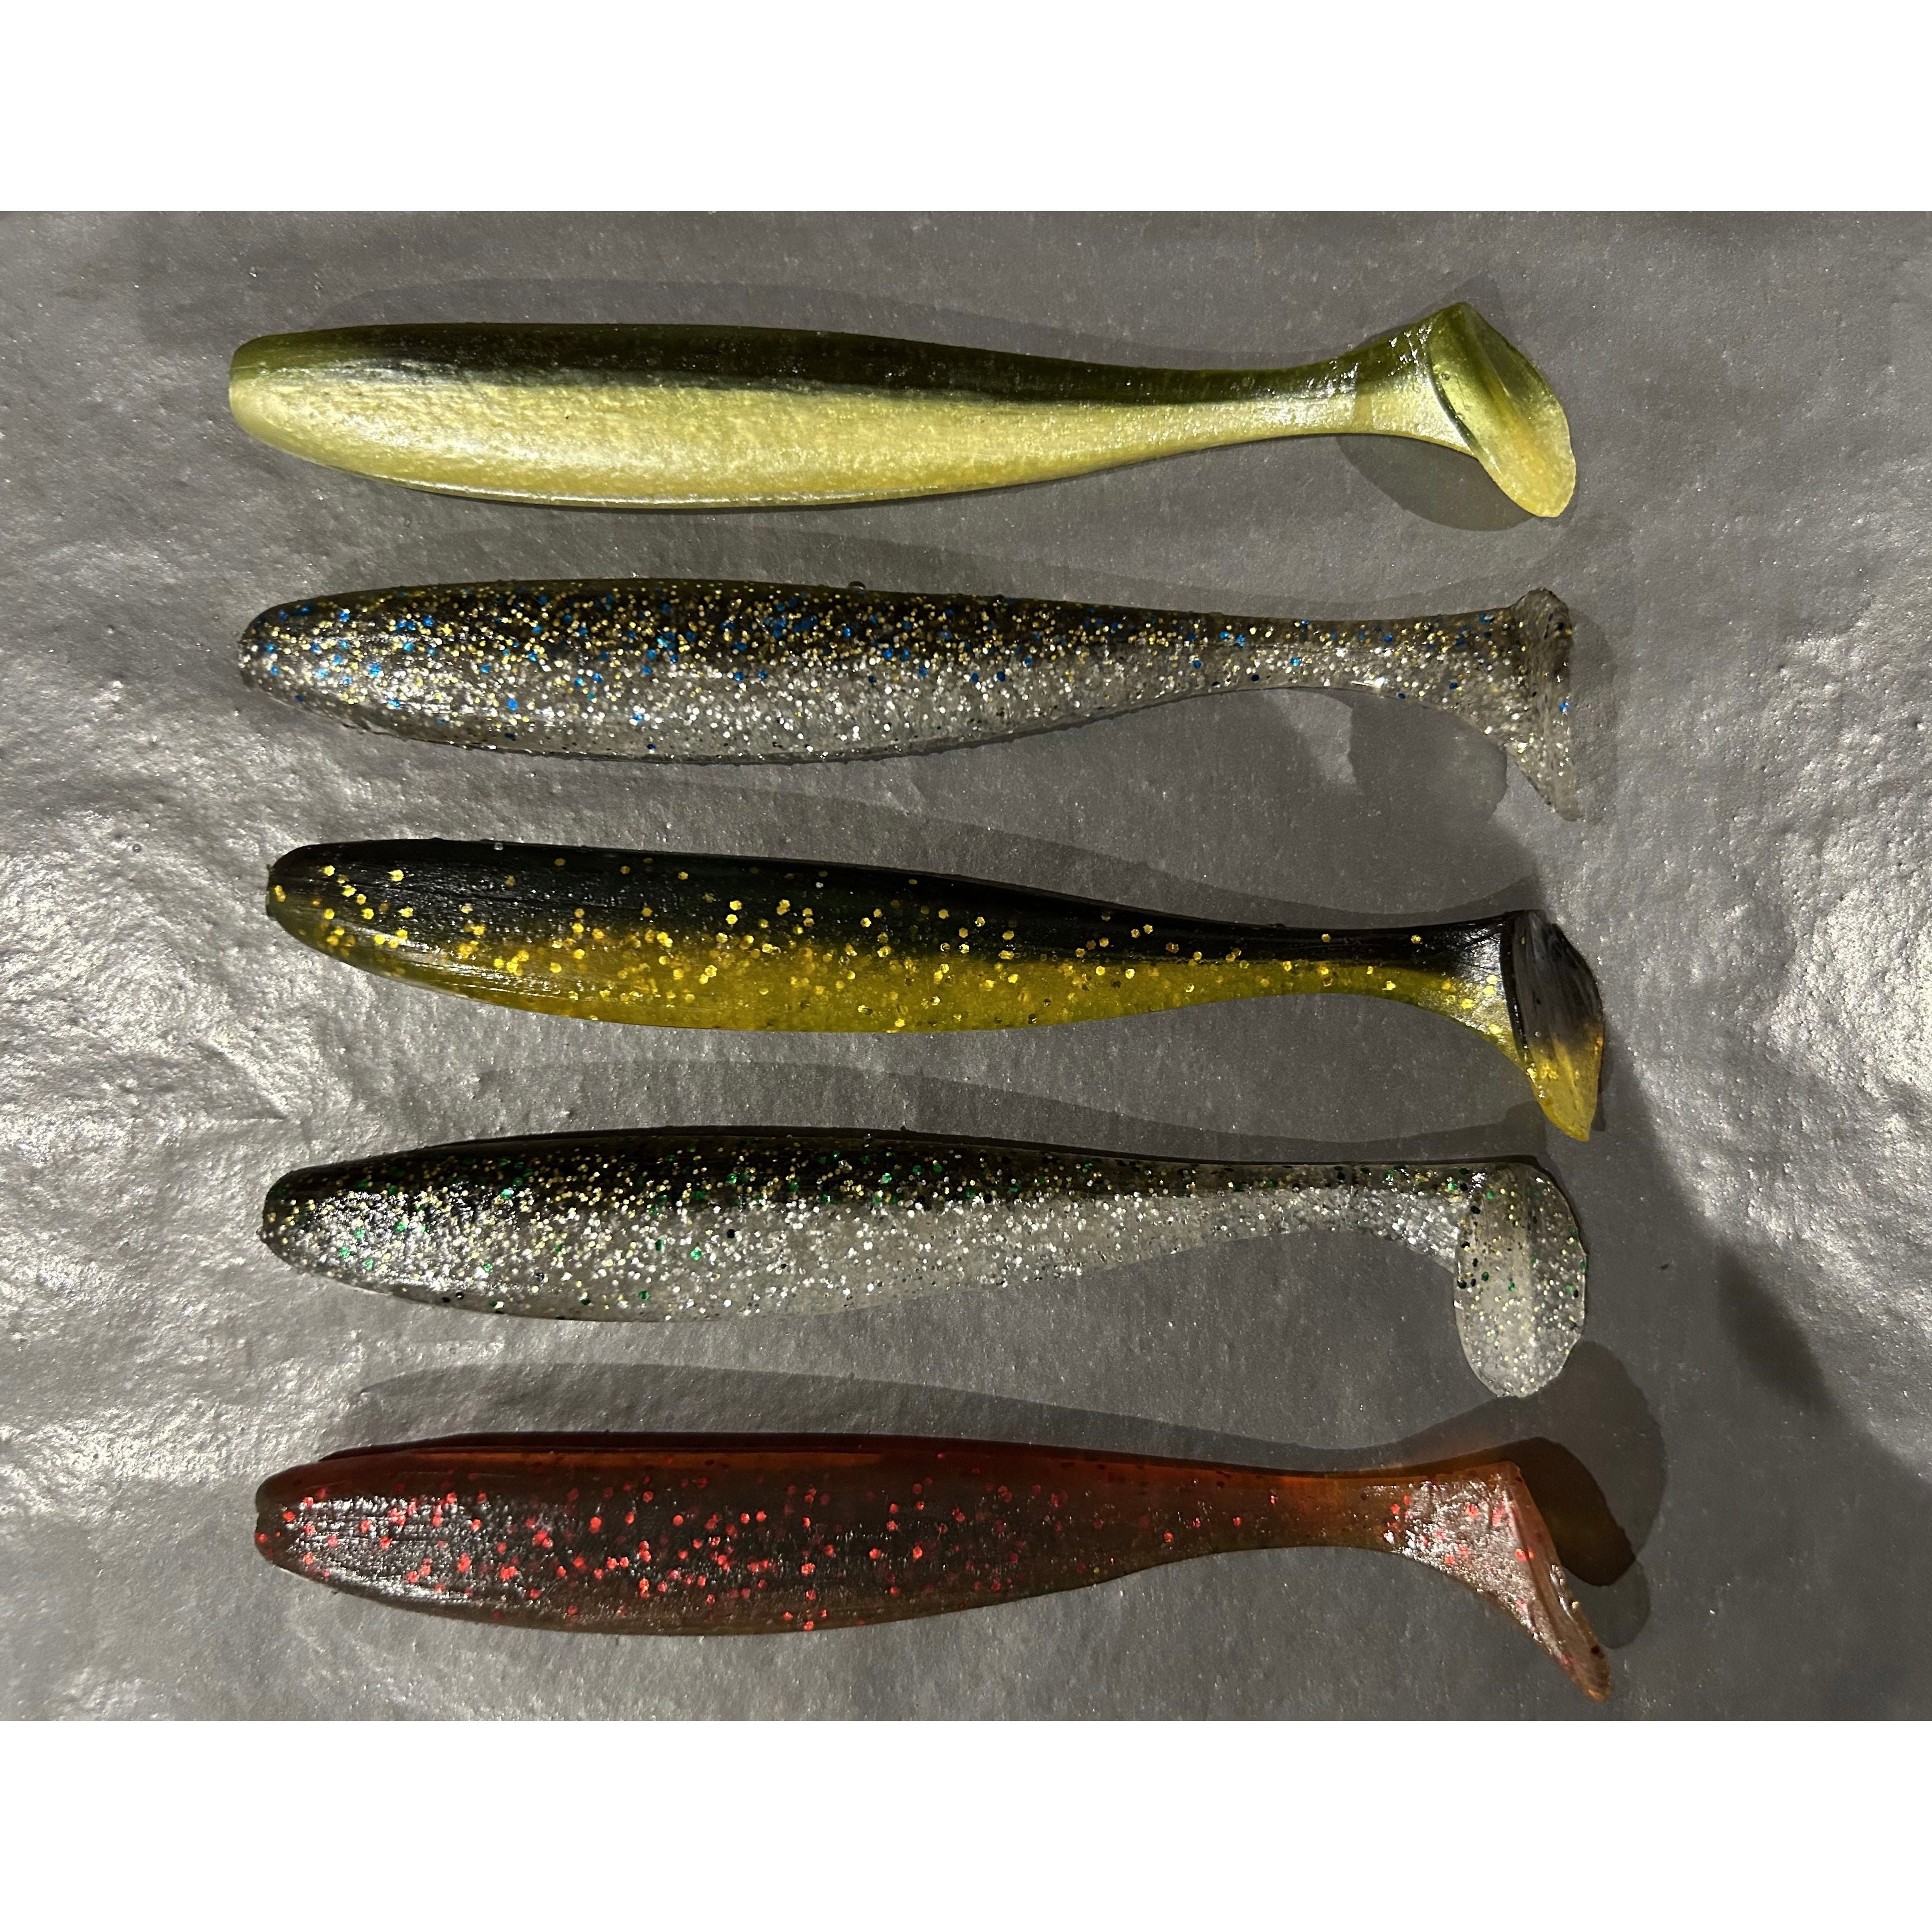 5” Supersoft Paddletail Bass Lure Sets